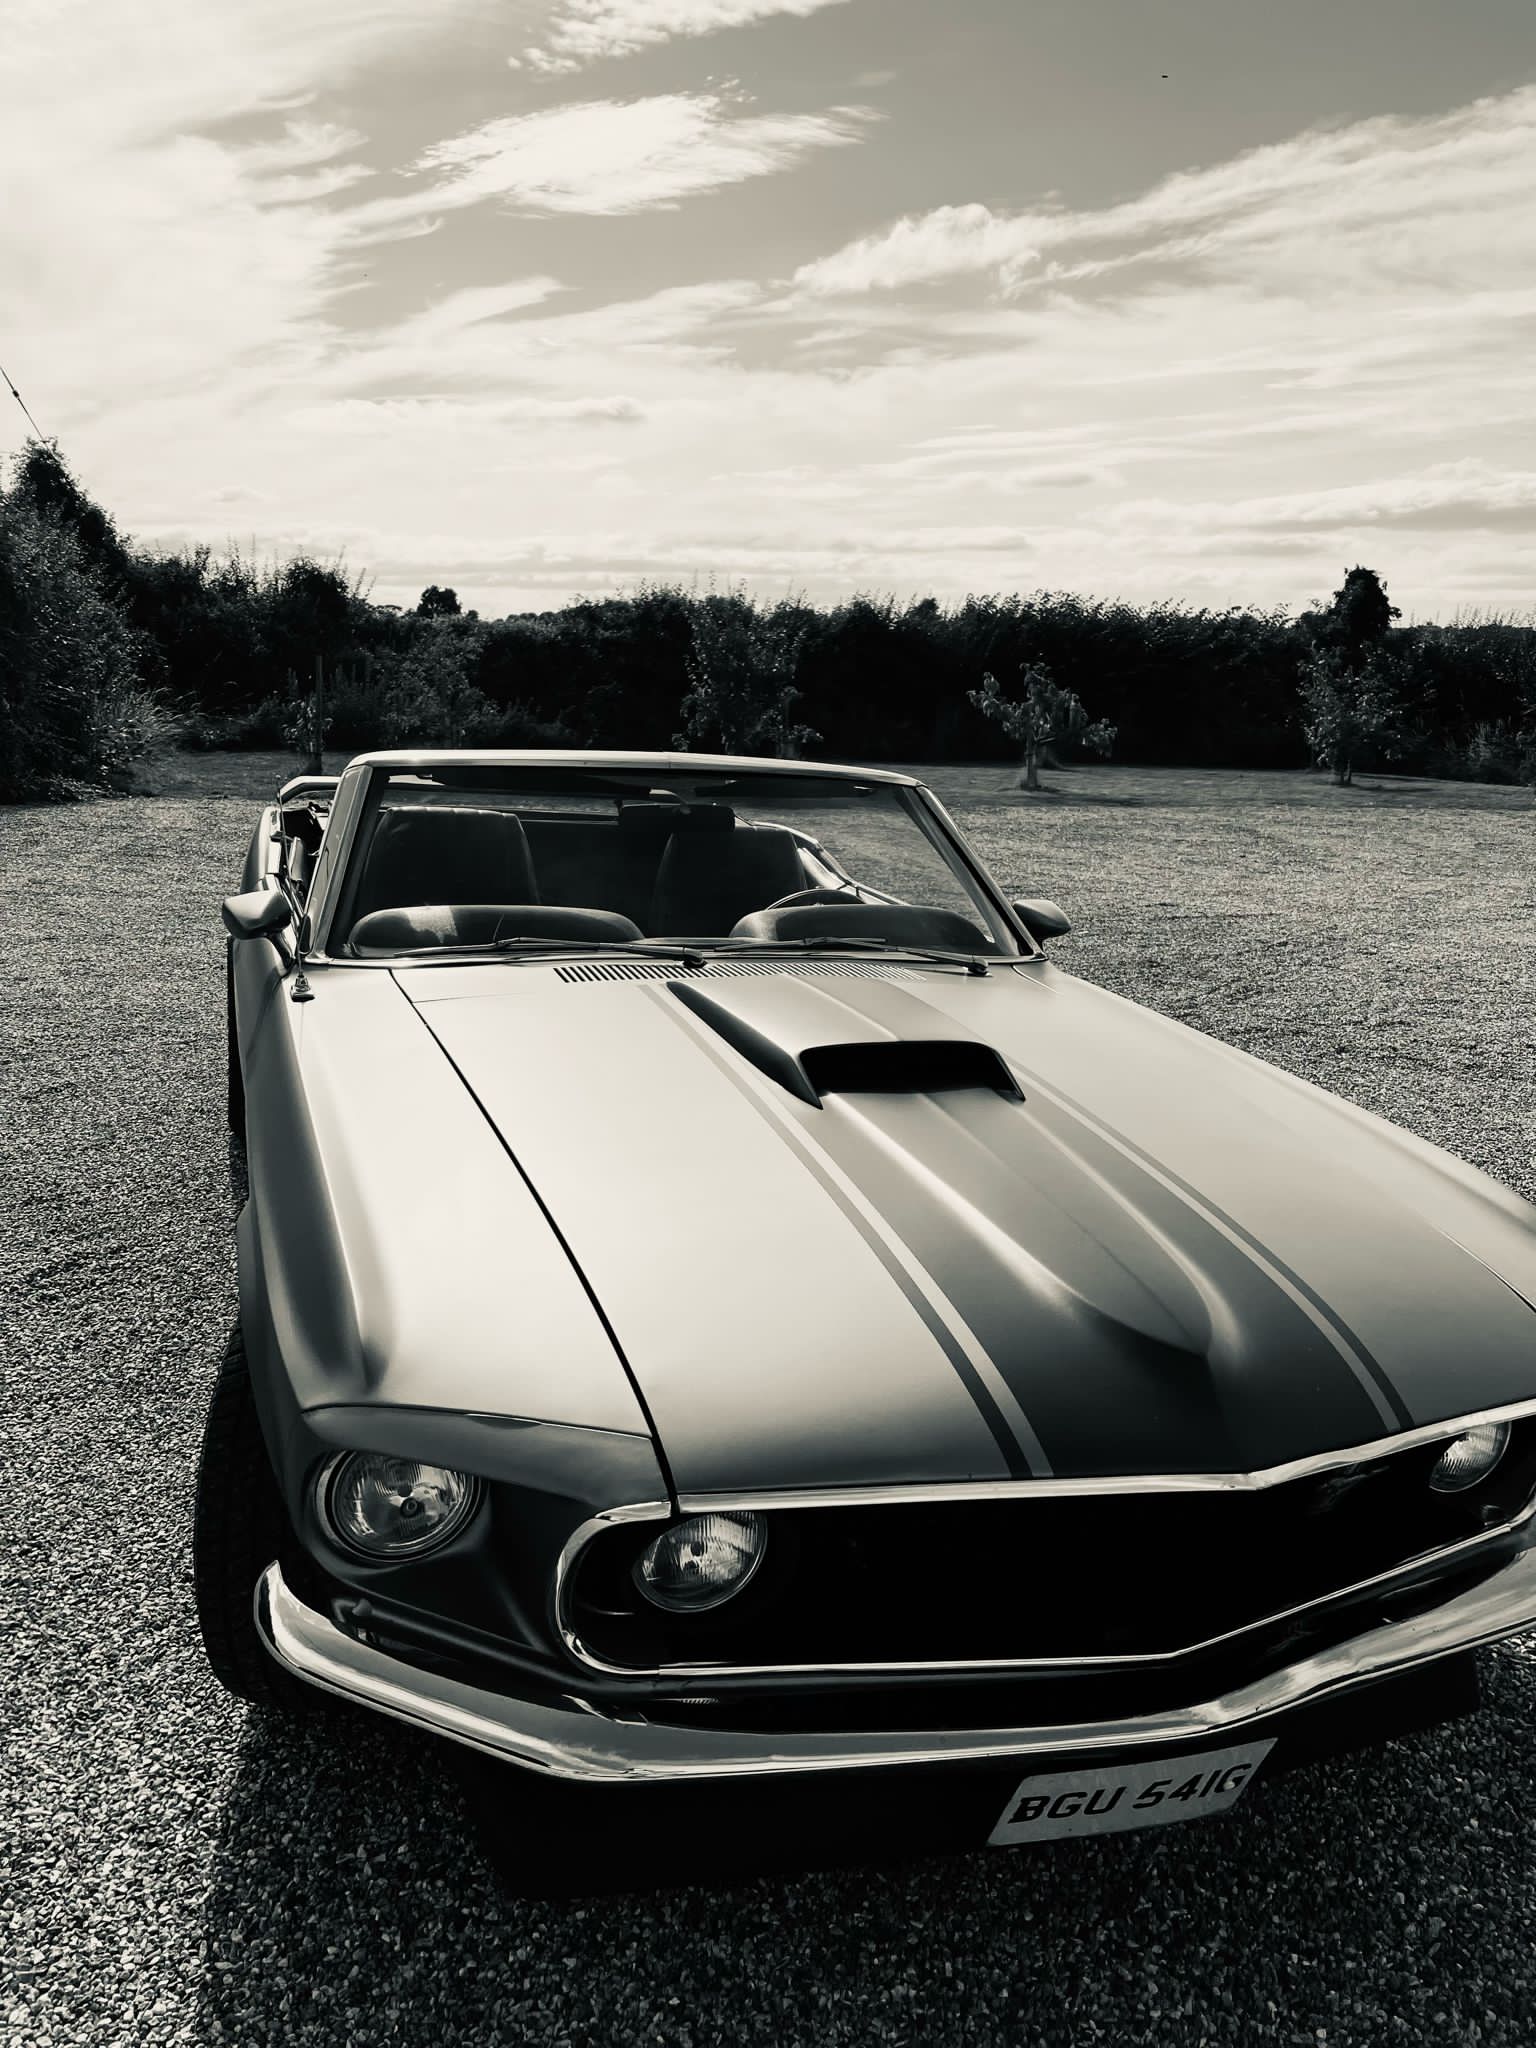 1969 FORD MUSTANG CONVERTABLE. 302 cu.in. V8 CONVERSION. WITH HOLLIE FOUR BARREL CARB. ELECTRIC - Image 18 of 19